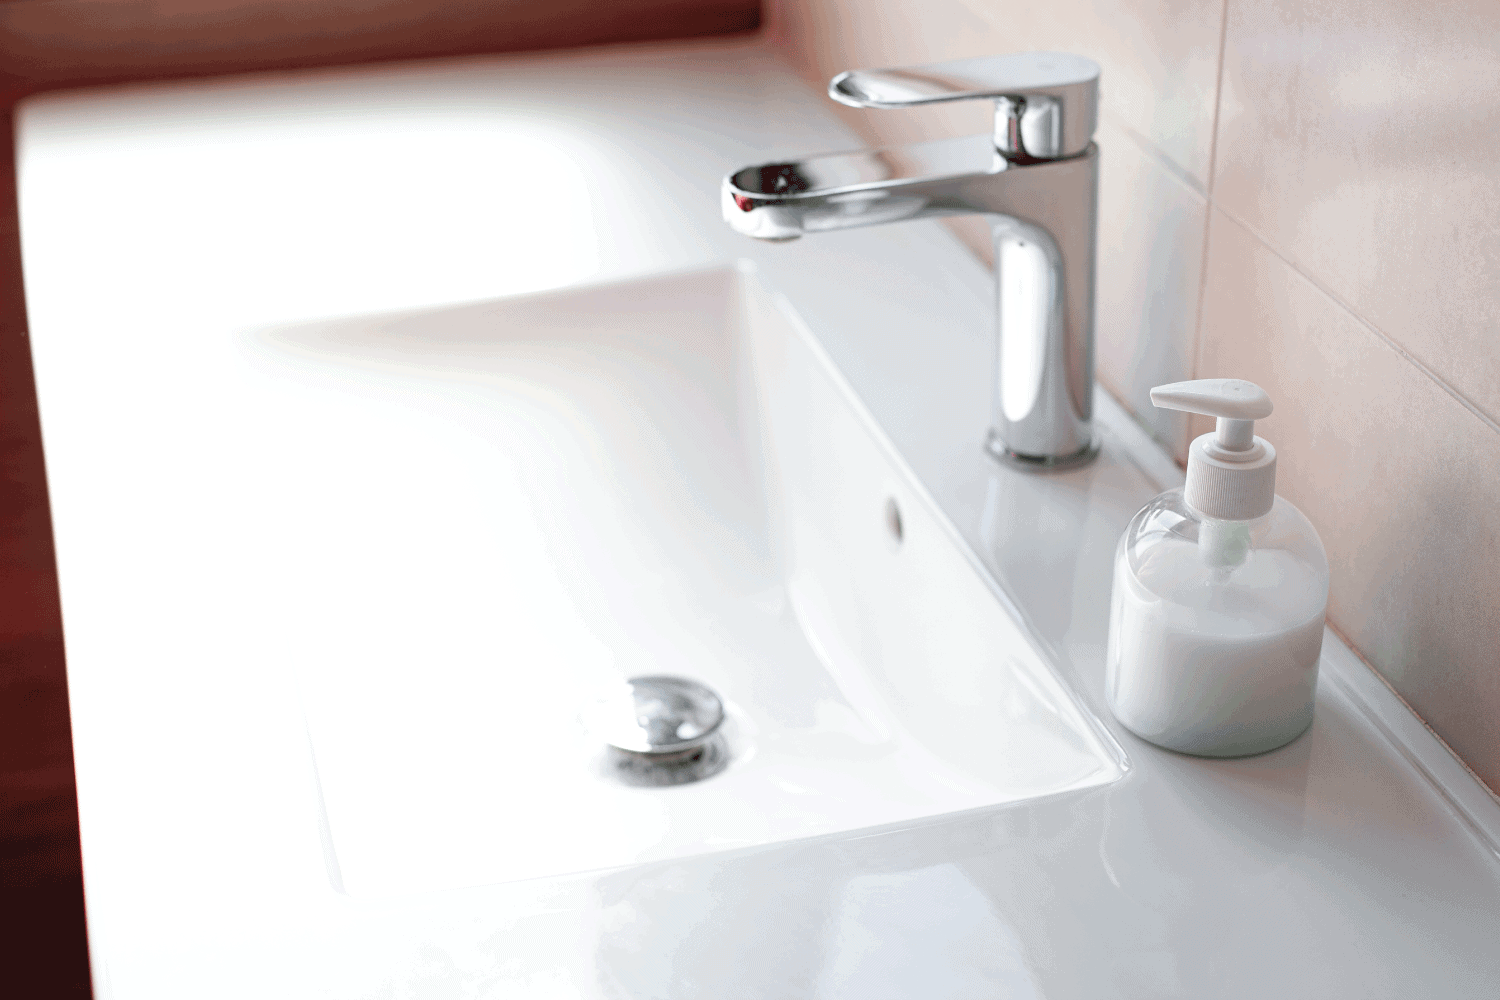 Sink soap dispenser to prevent coronavirus infection. How To Get Rid Of Ants In A Bathroom Sink